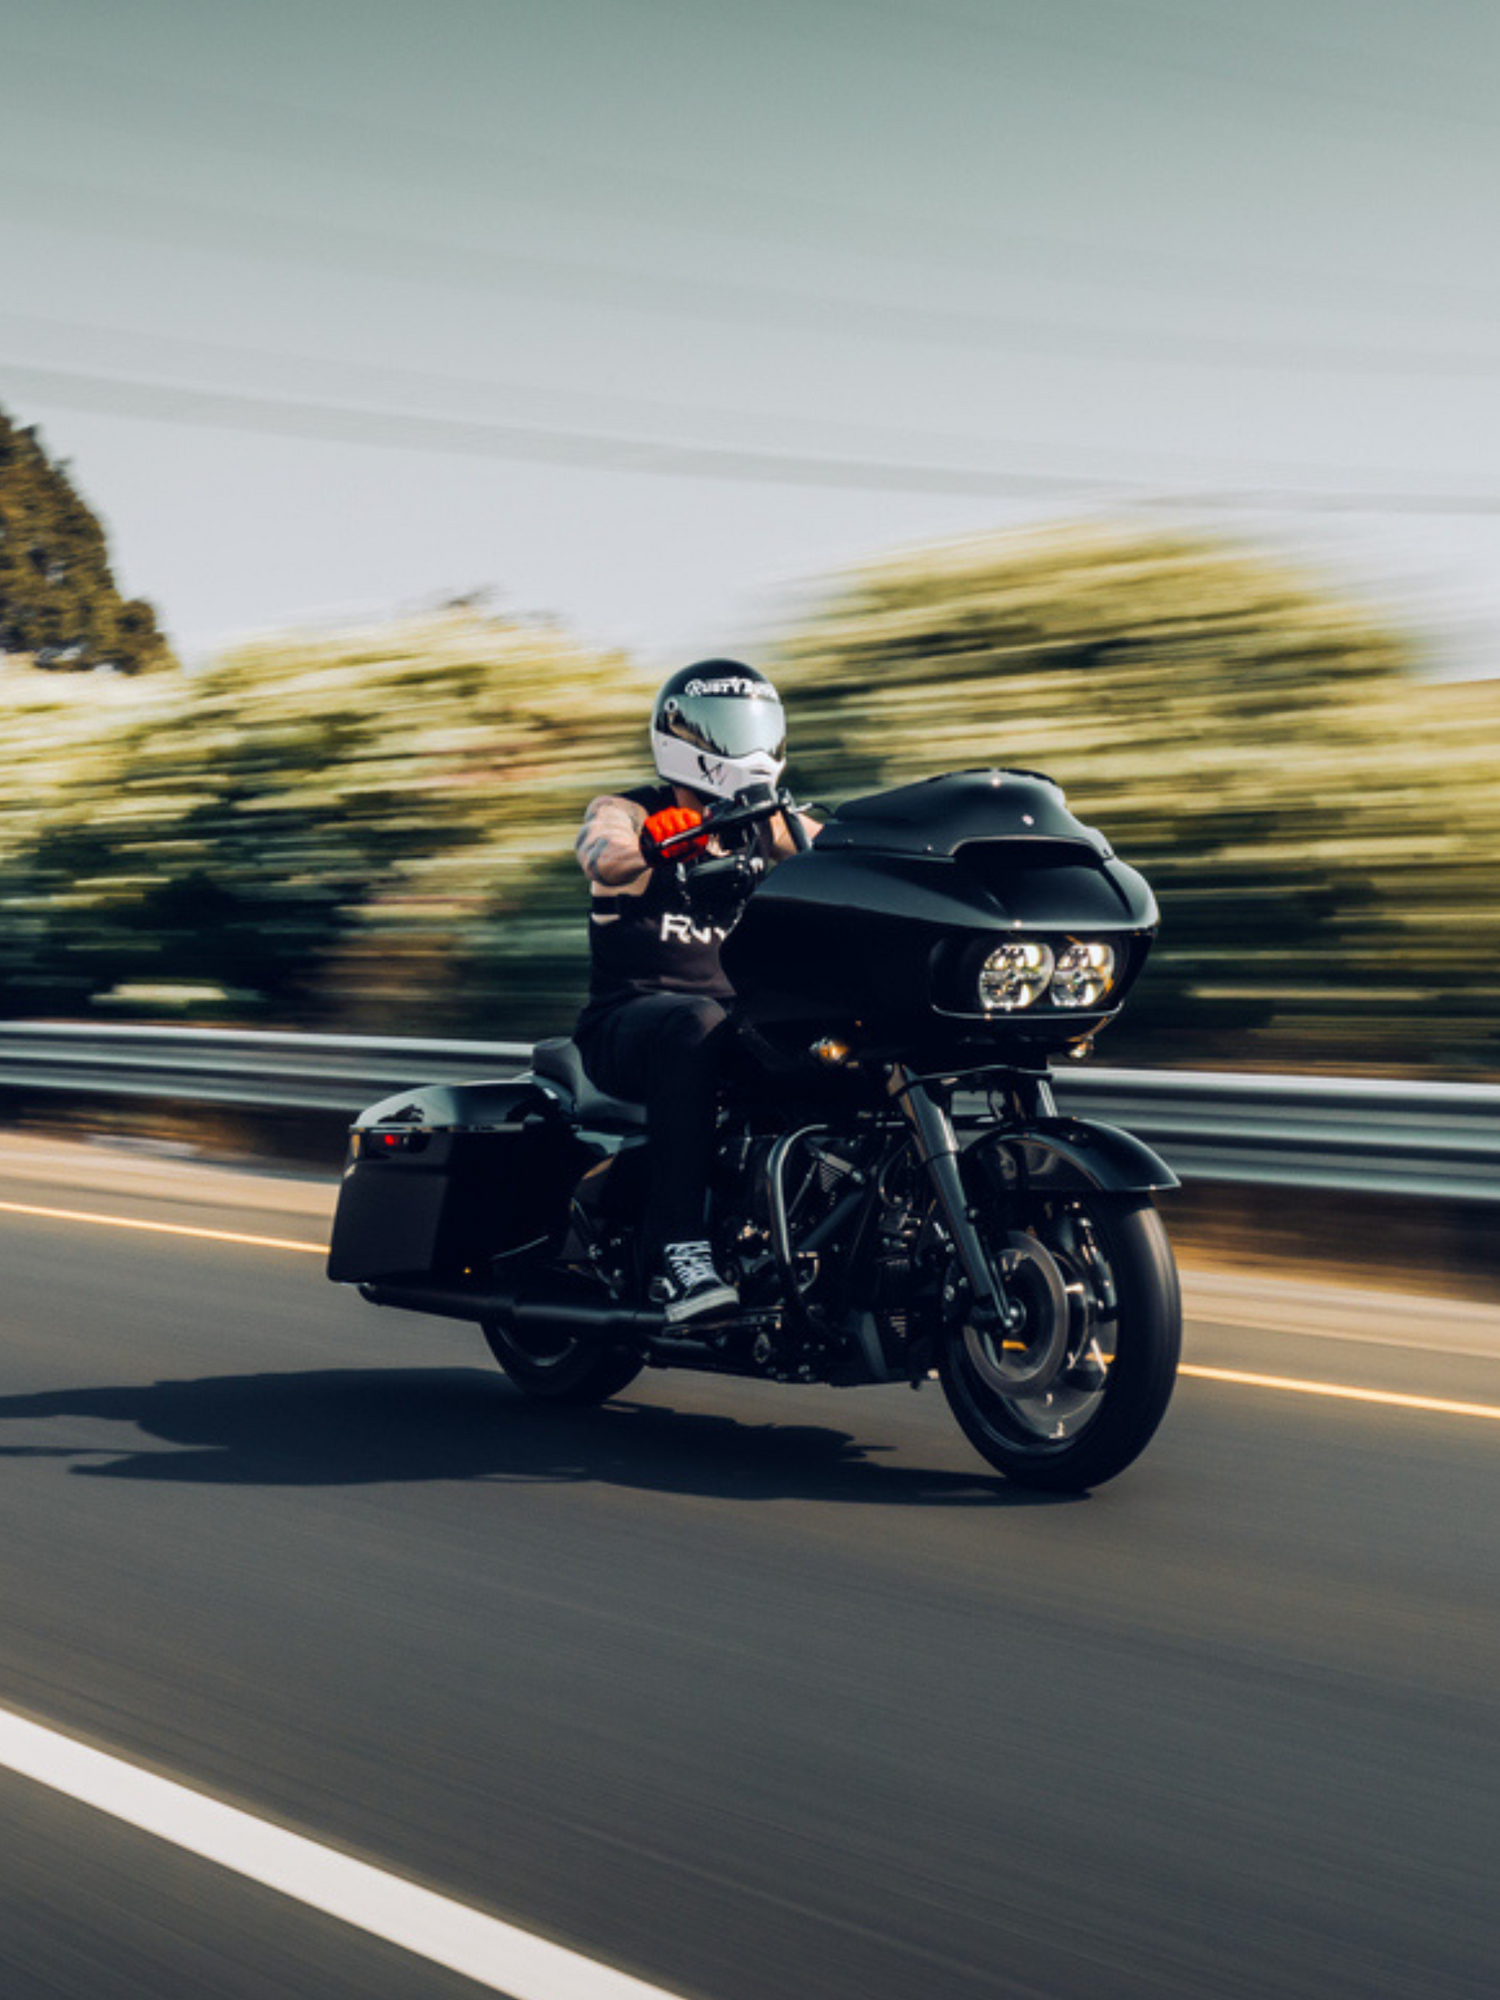 man riding a black motorcycle on a highway